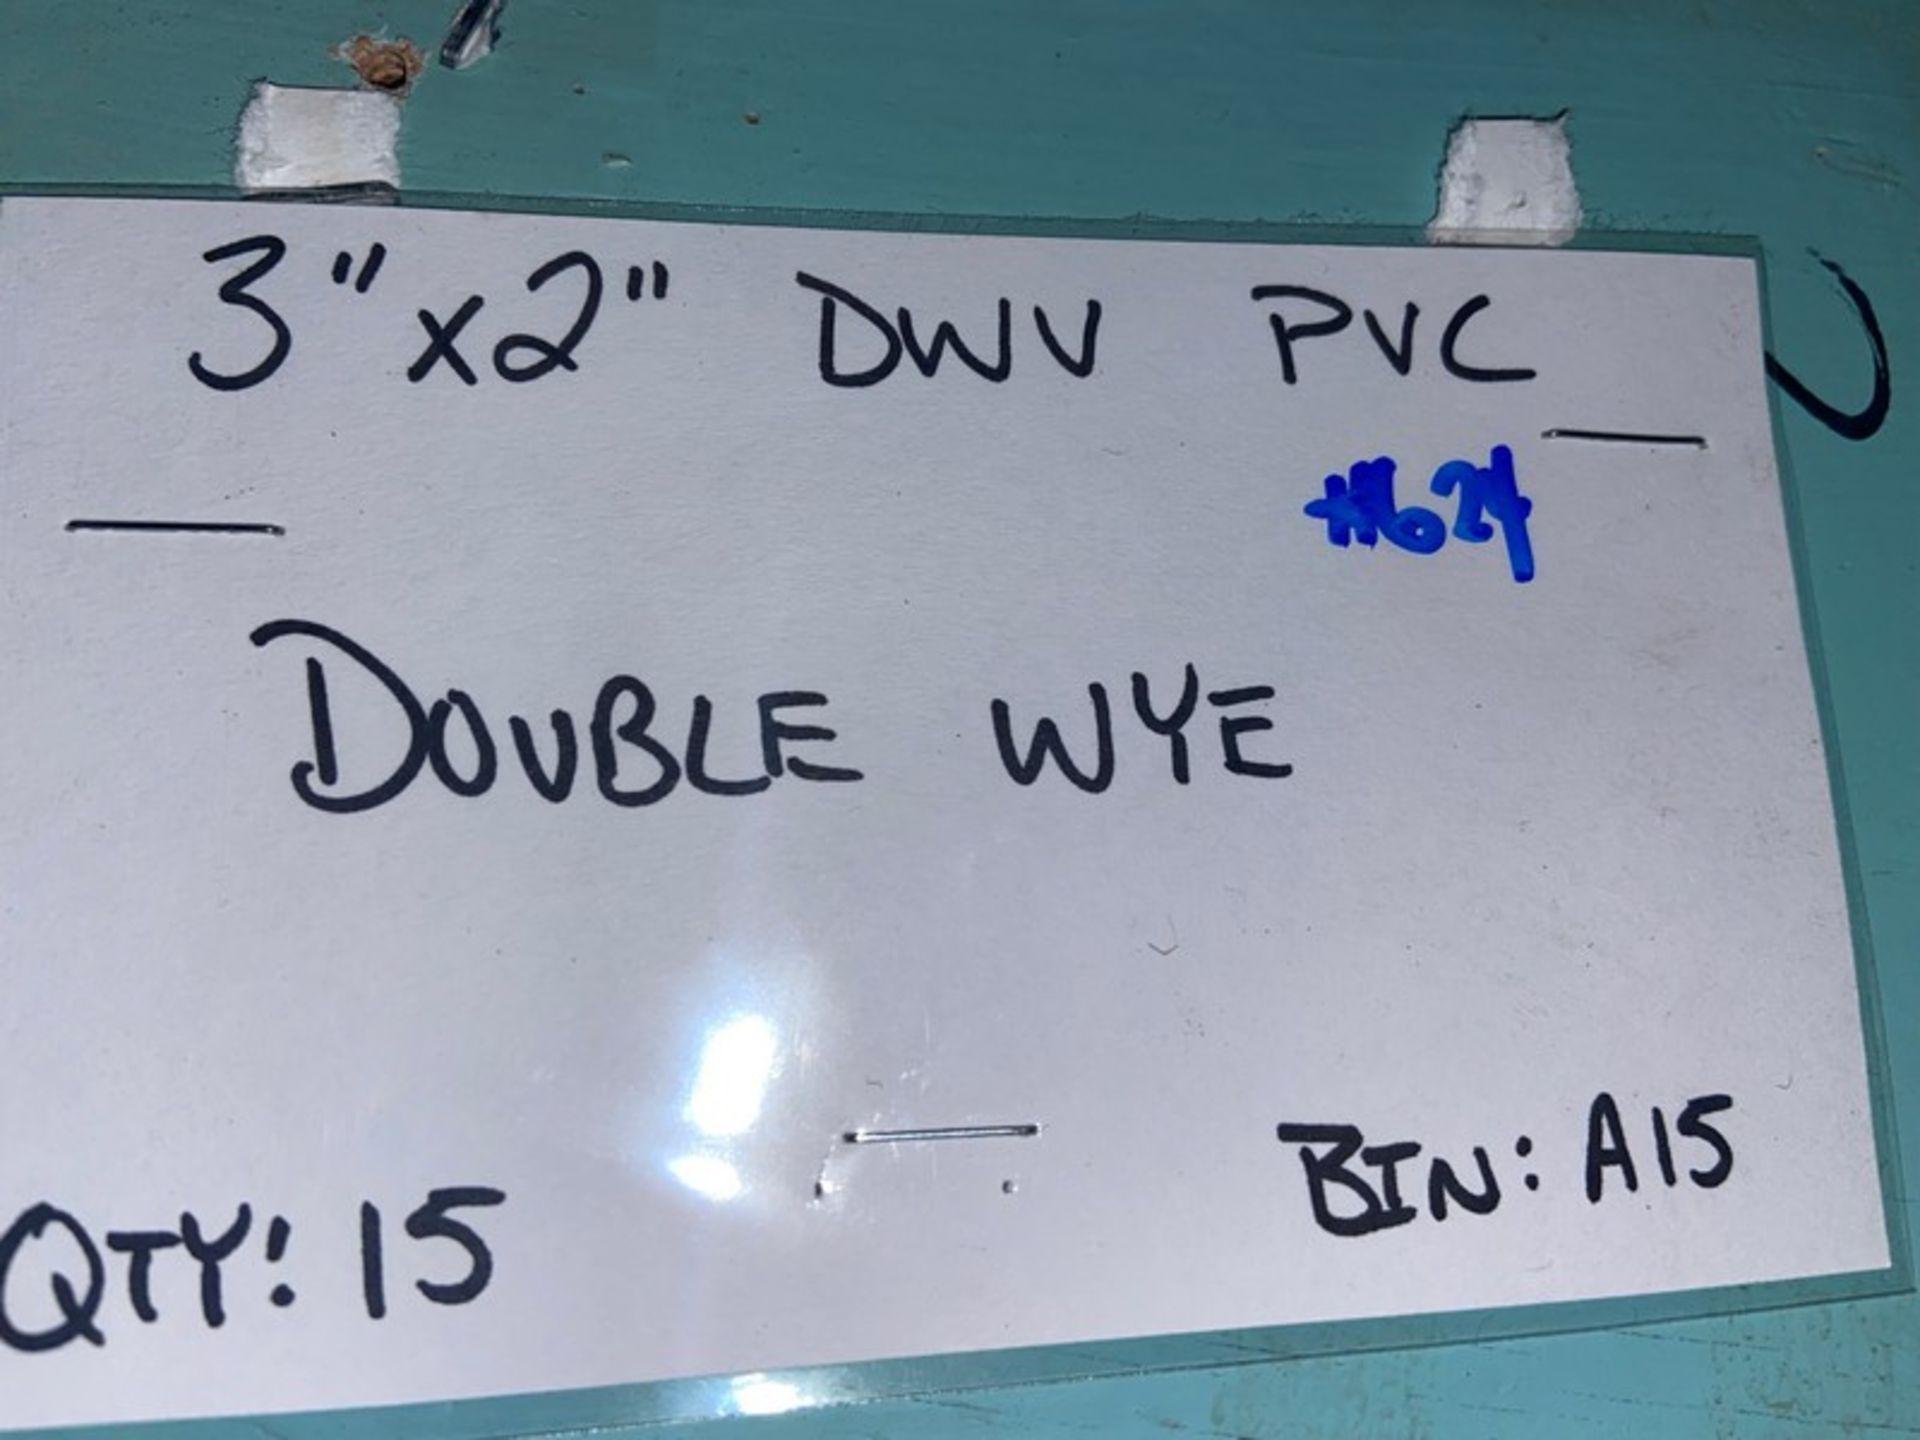 (15) 3”x2” DWV PVC DOUBLE WYE (Bin:A15)(LOCATED IN MONROEVILLE, PA) - Image 2 of 2